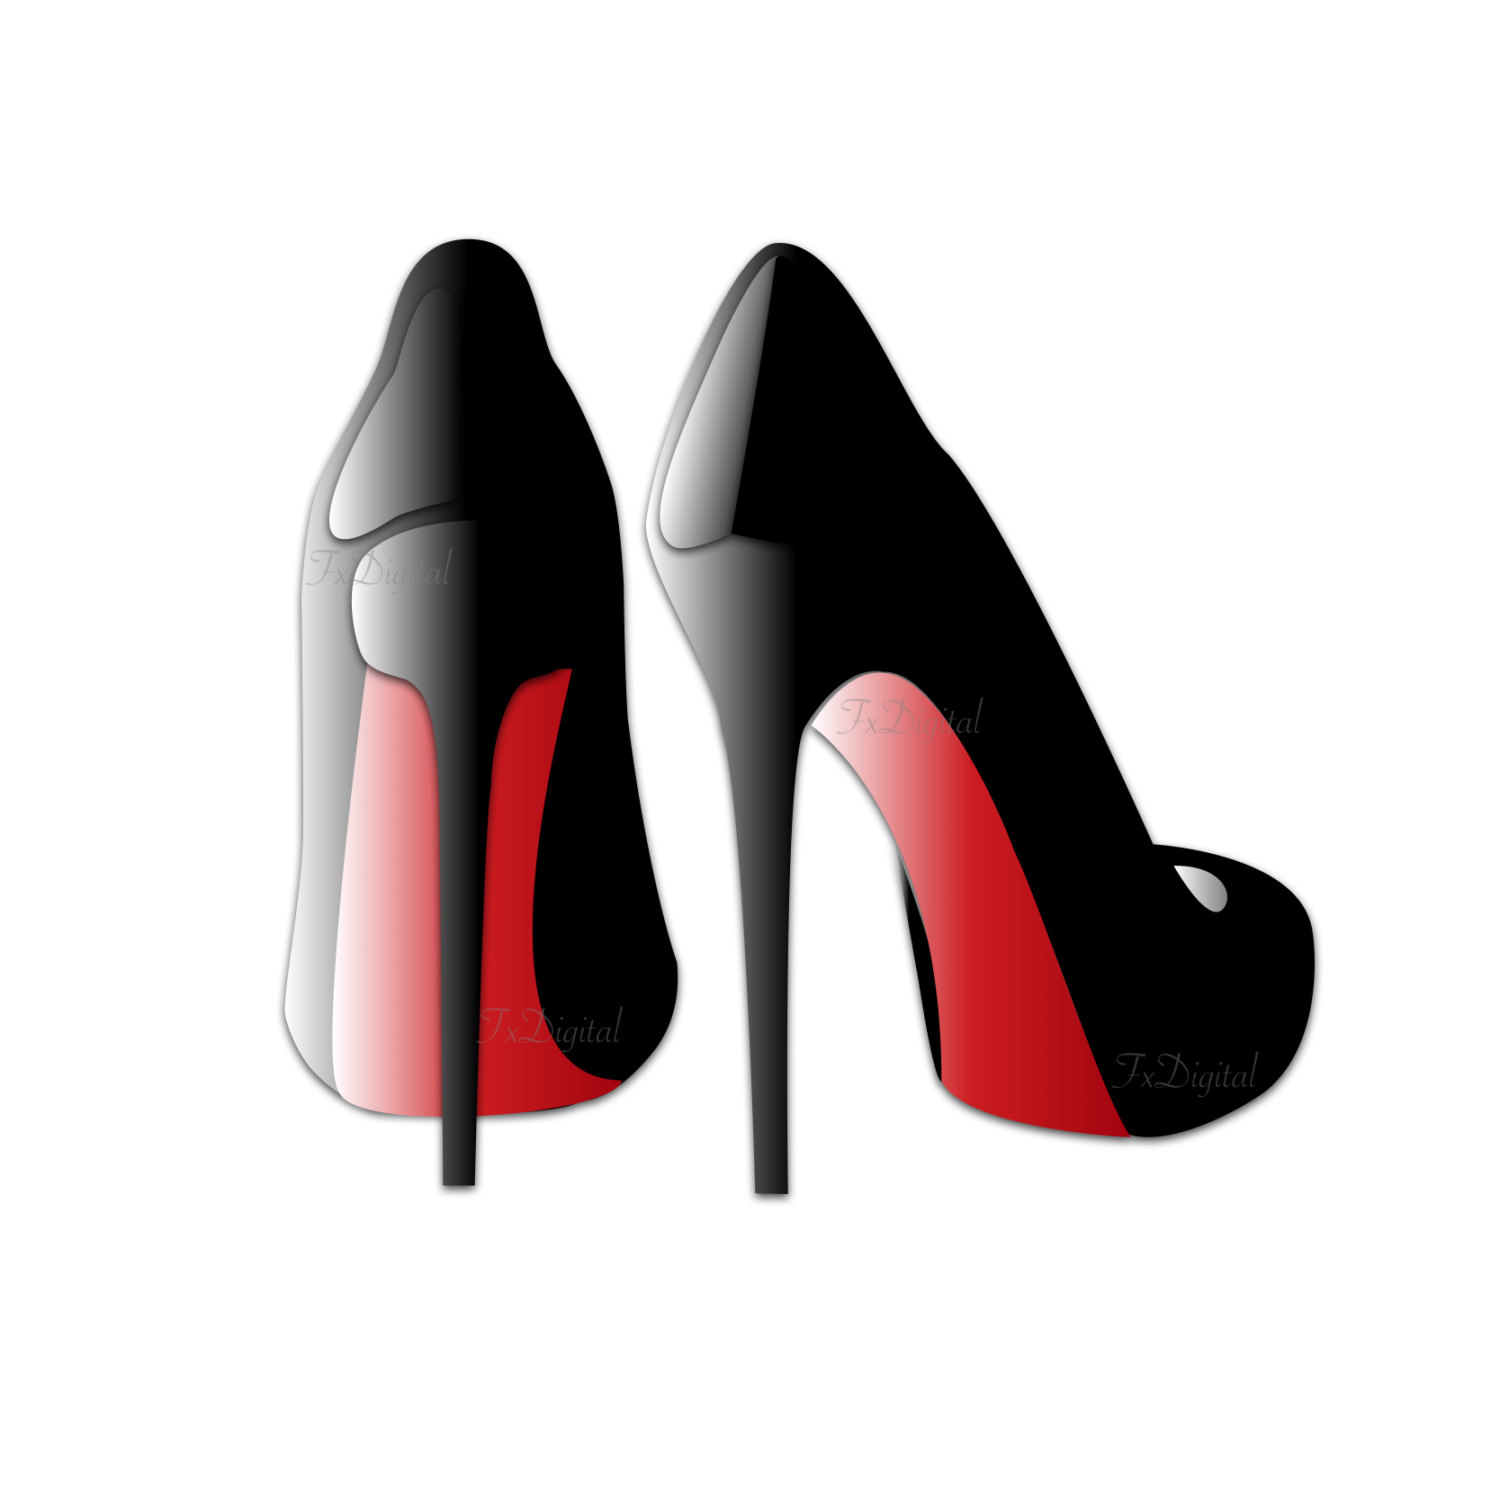 Red High Heels Clip Art Sexy High Heels by CatherineClennan